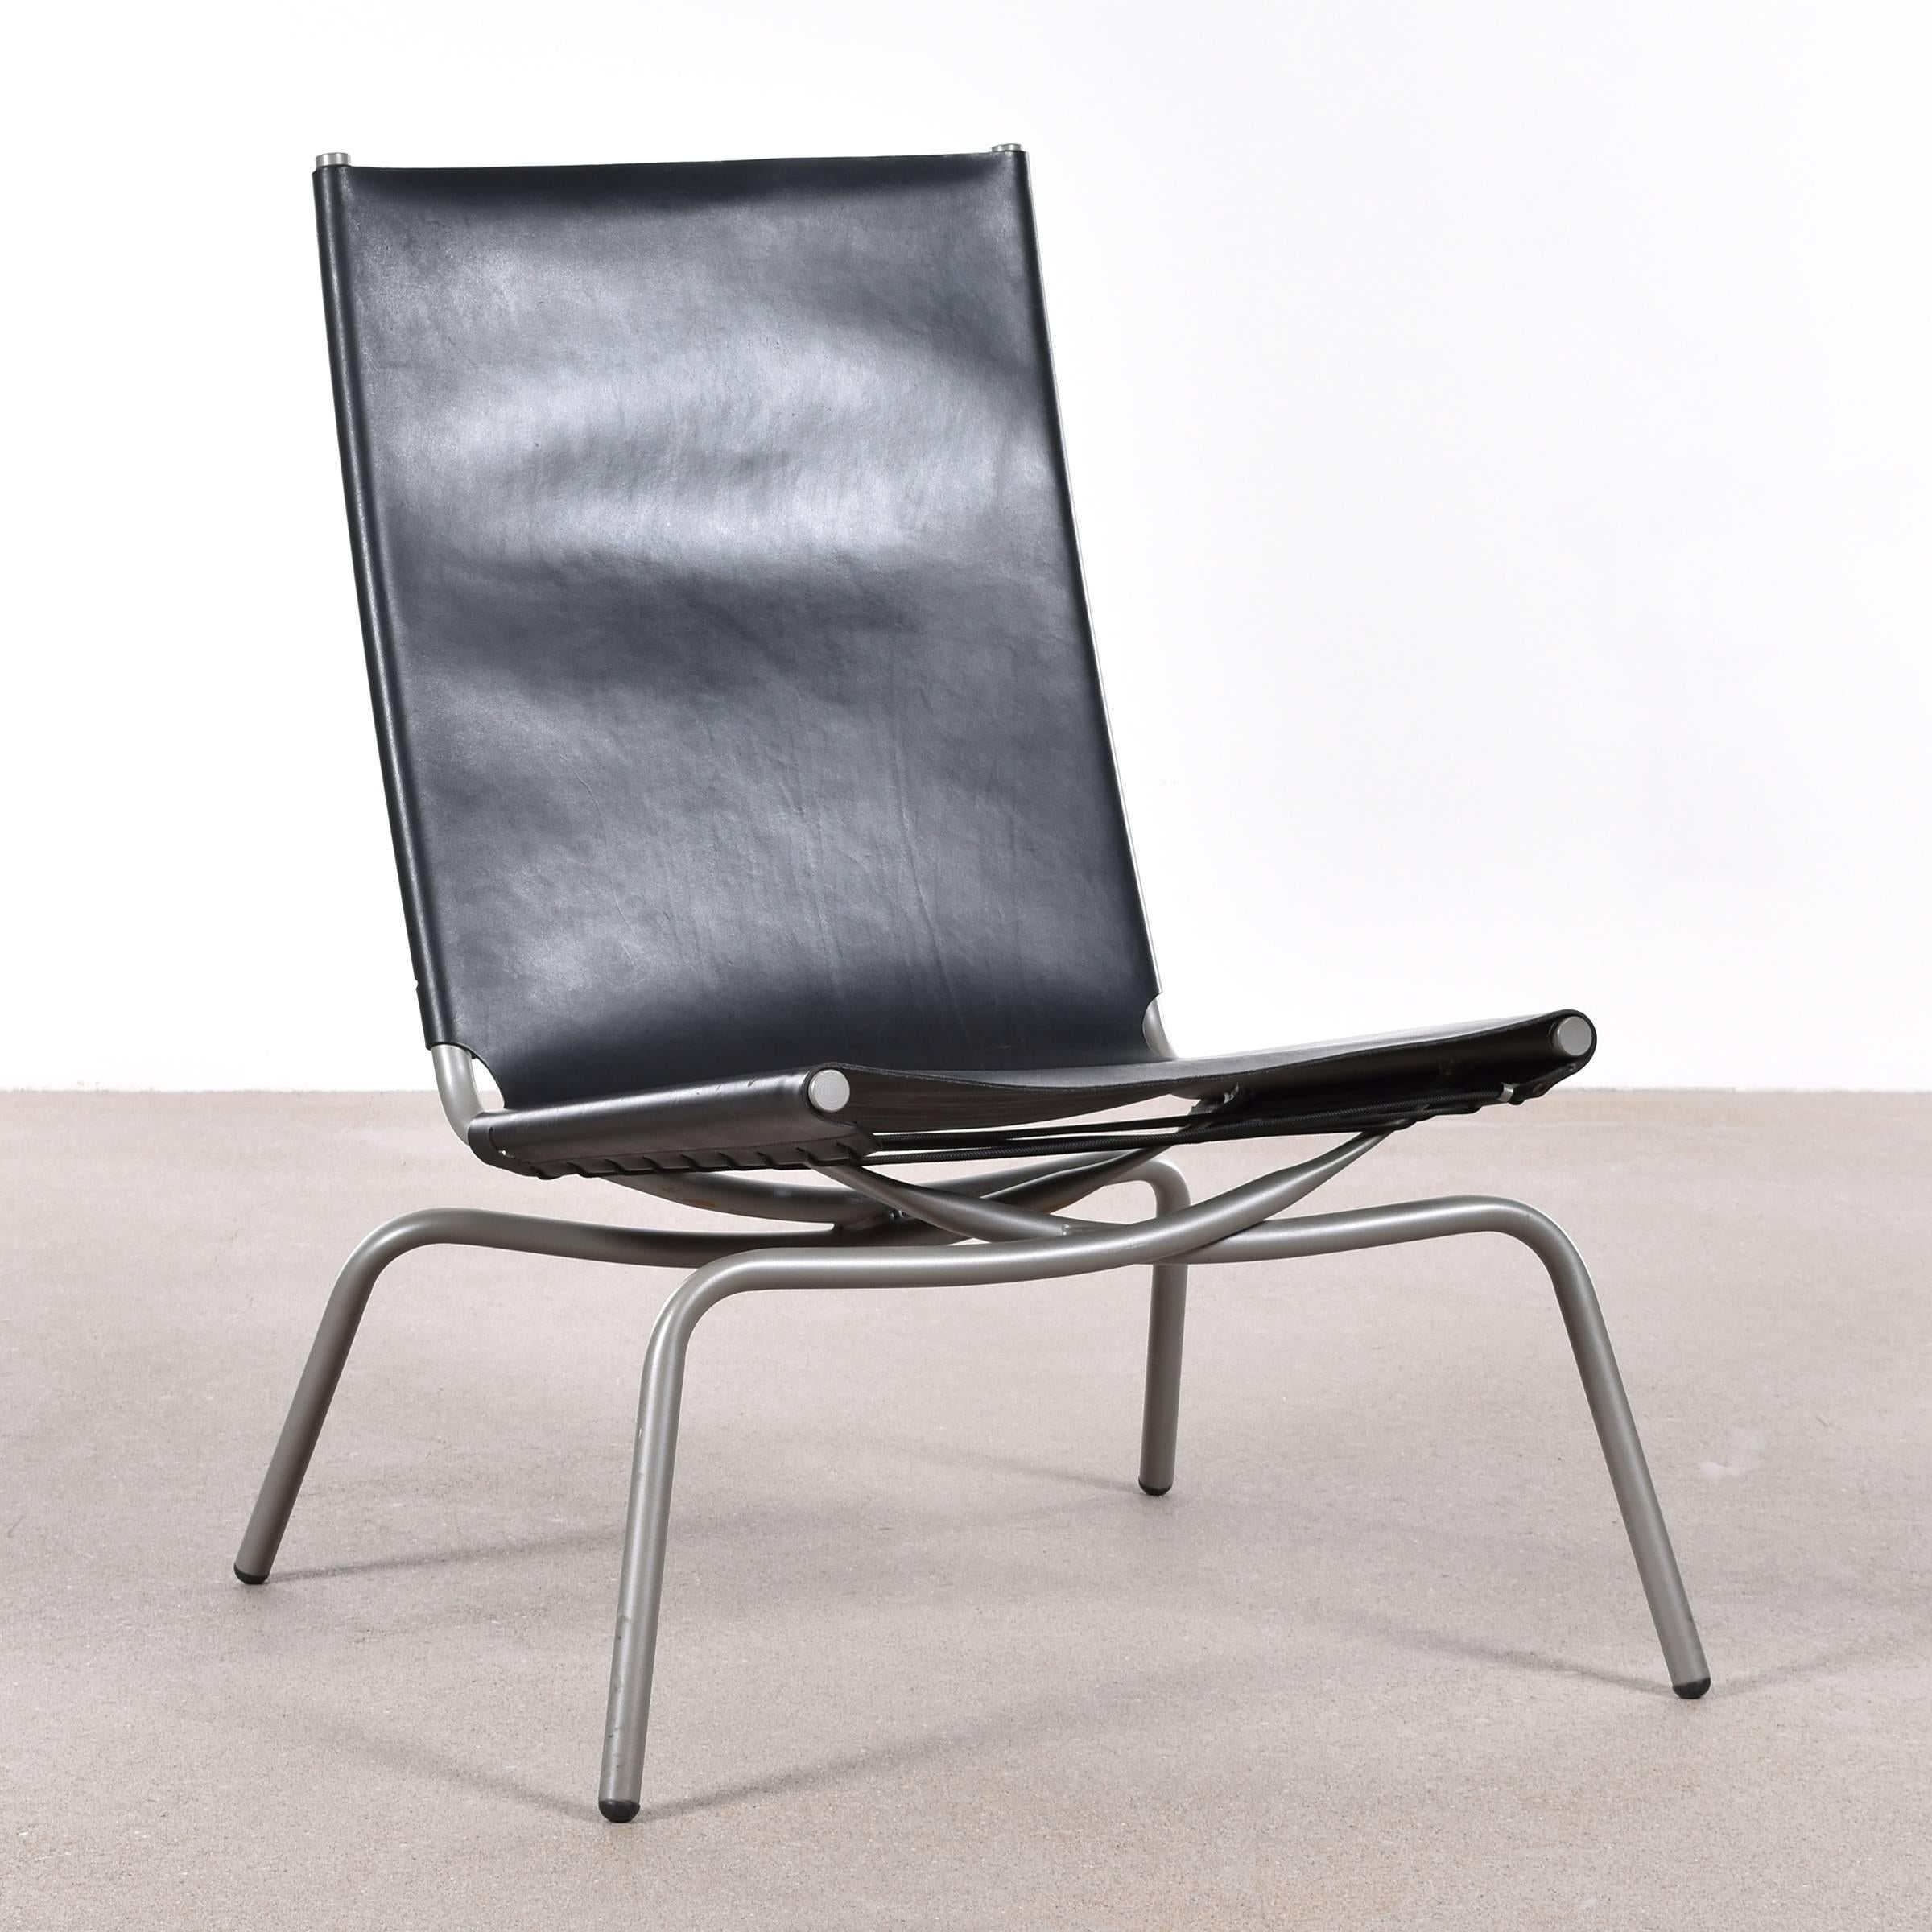 Nice lounge chair by Fabiaan Van Severen with crossed legs grey coated metal tubular frame and thick black leather upholstery fastened with rope. Very good original condition.

Free shipping for European destinations!

We strive for a high level